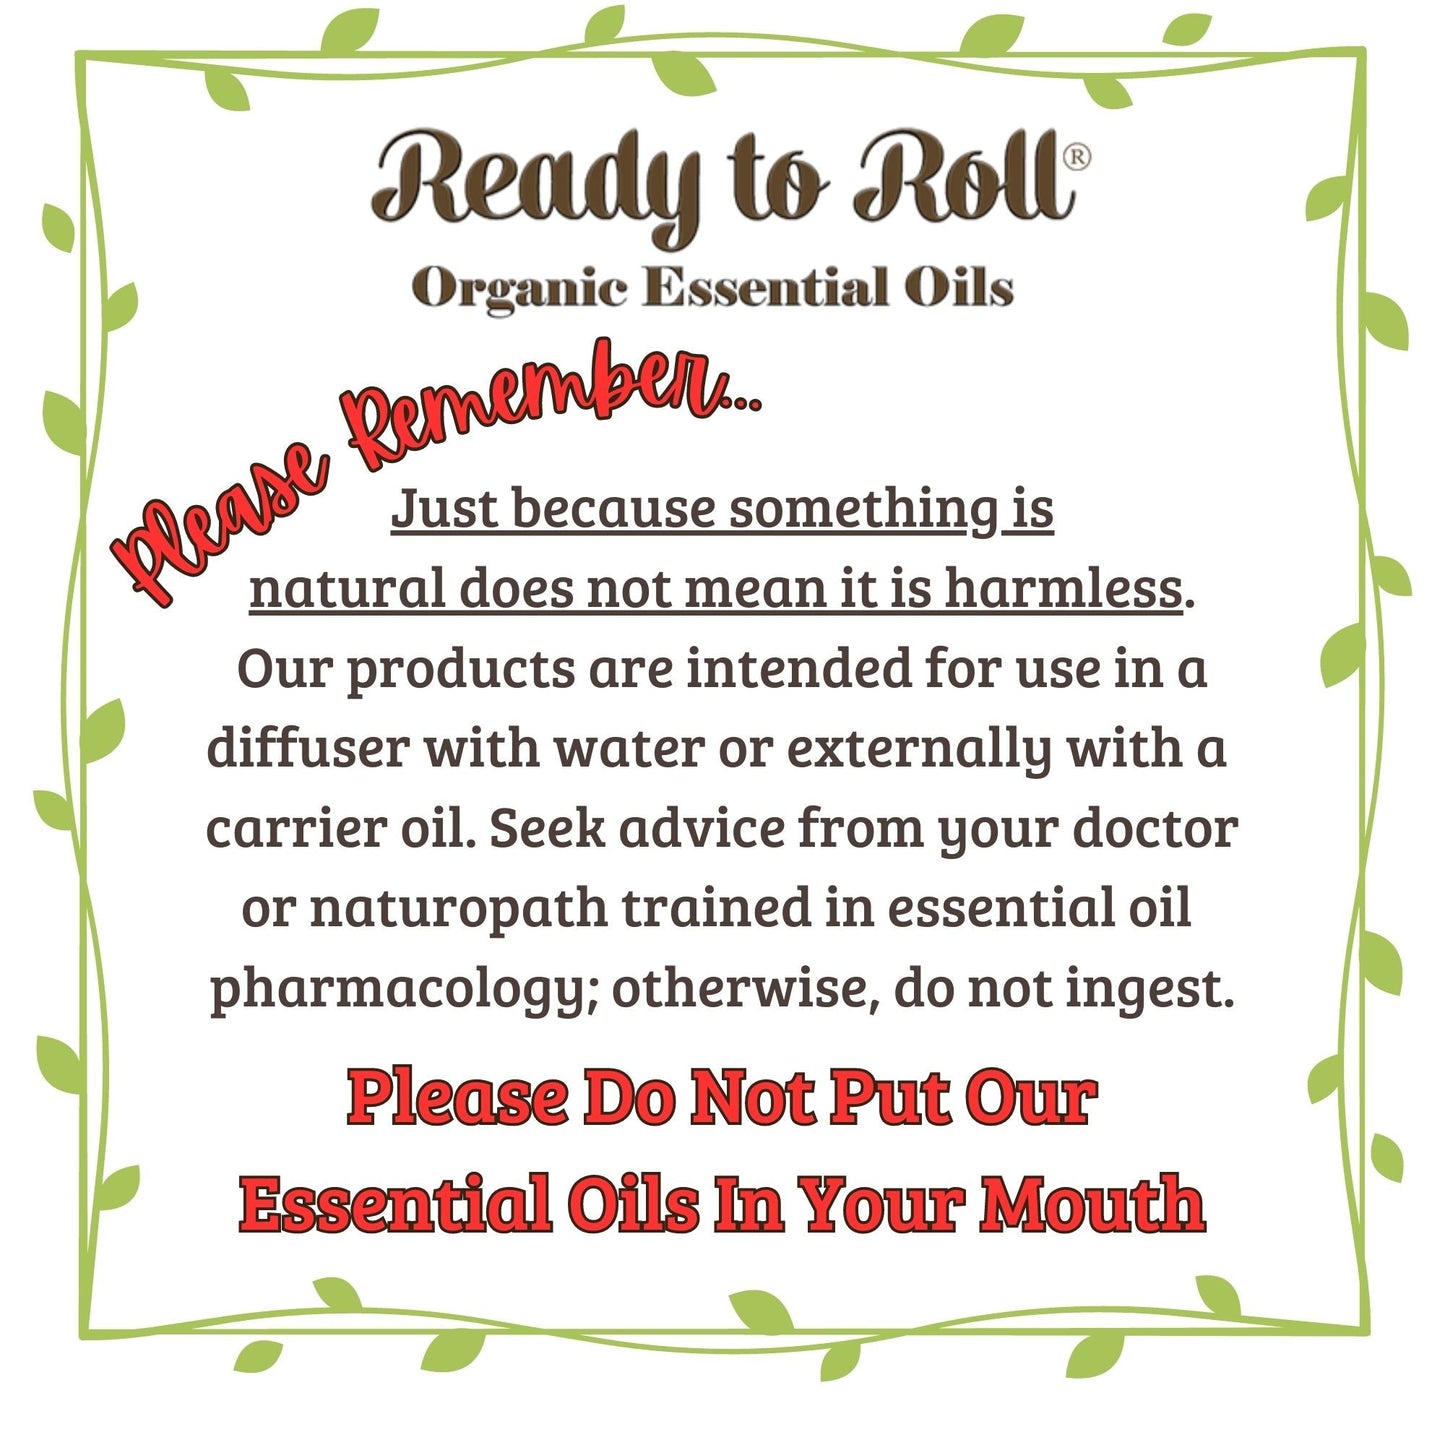 Ready to Roll® Everglades Snake Oil Organic Essential Oil Blend